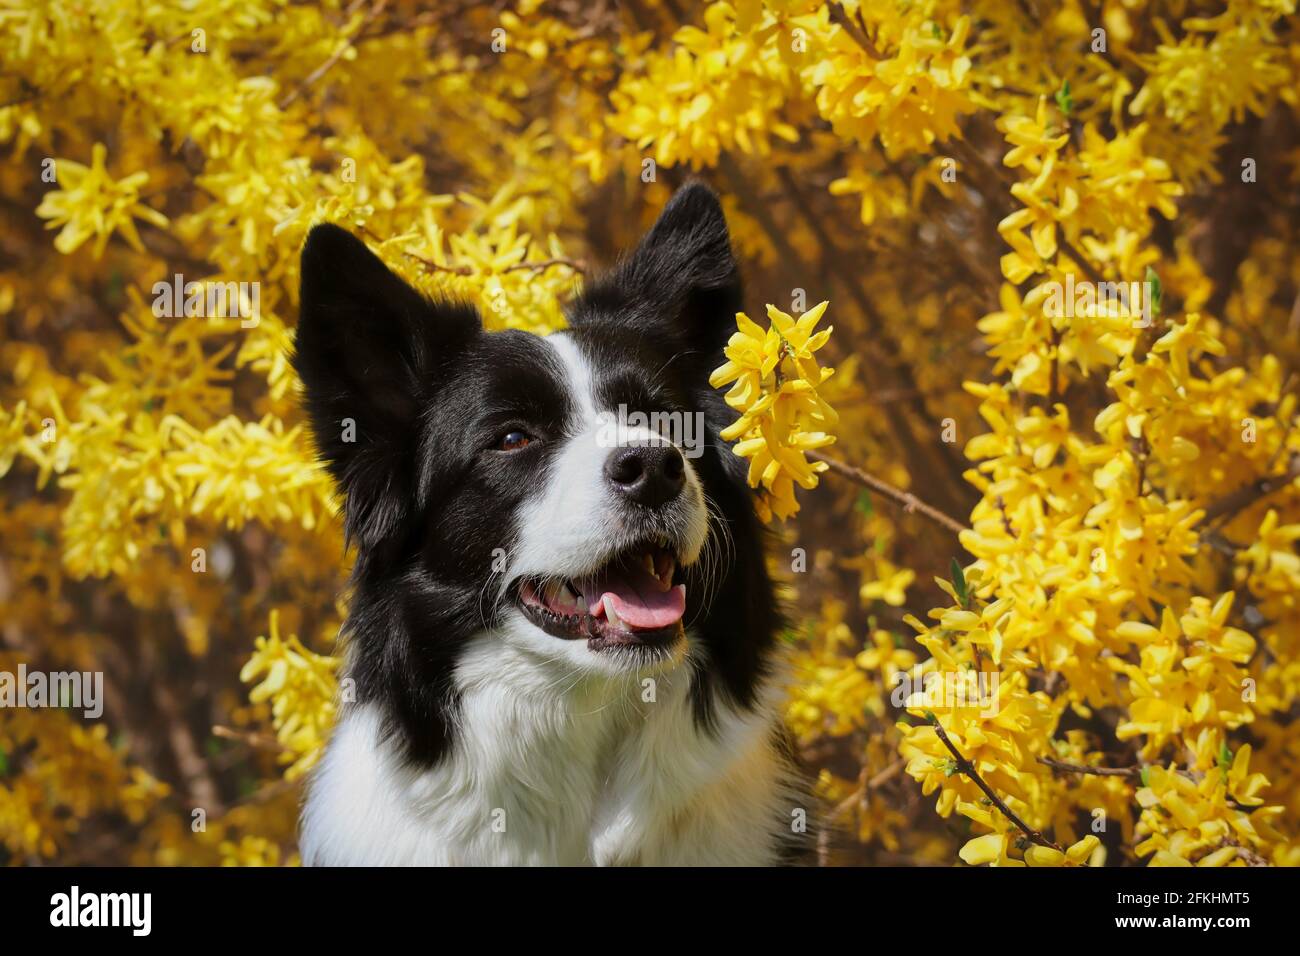 Close-up of Adorable Black and White Border Collie Dog with Yellow Forsythia during Spring. Stock Photo